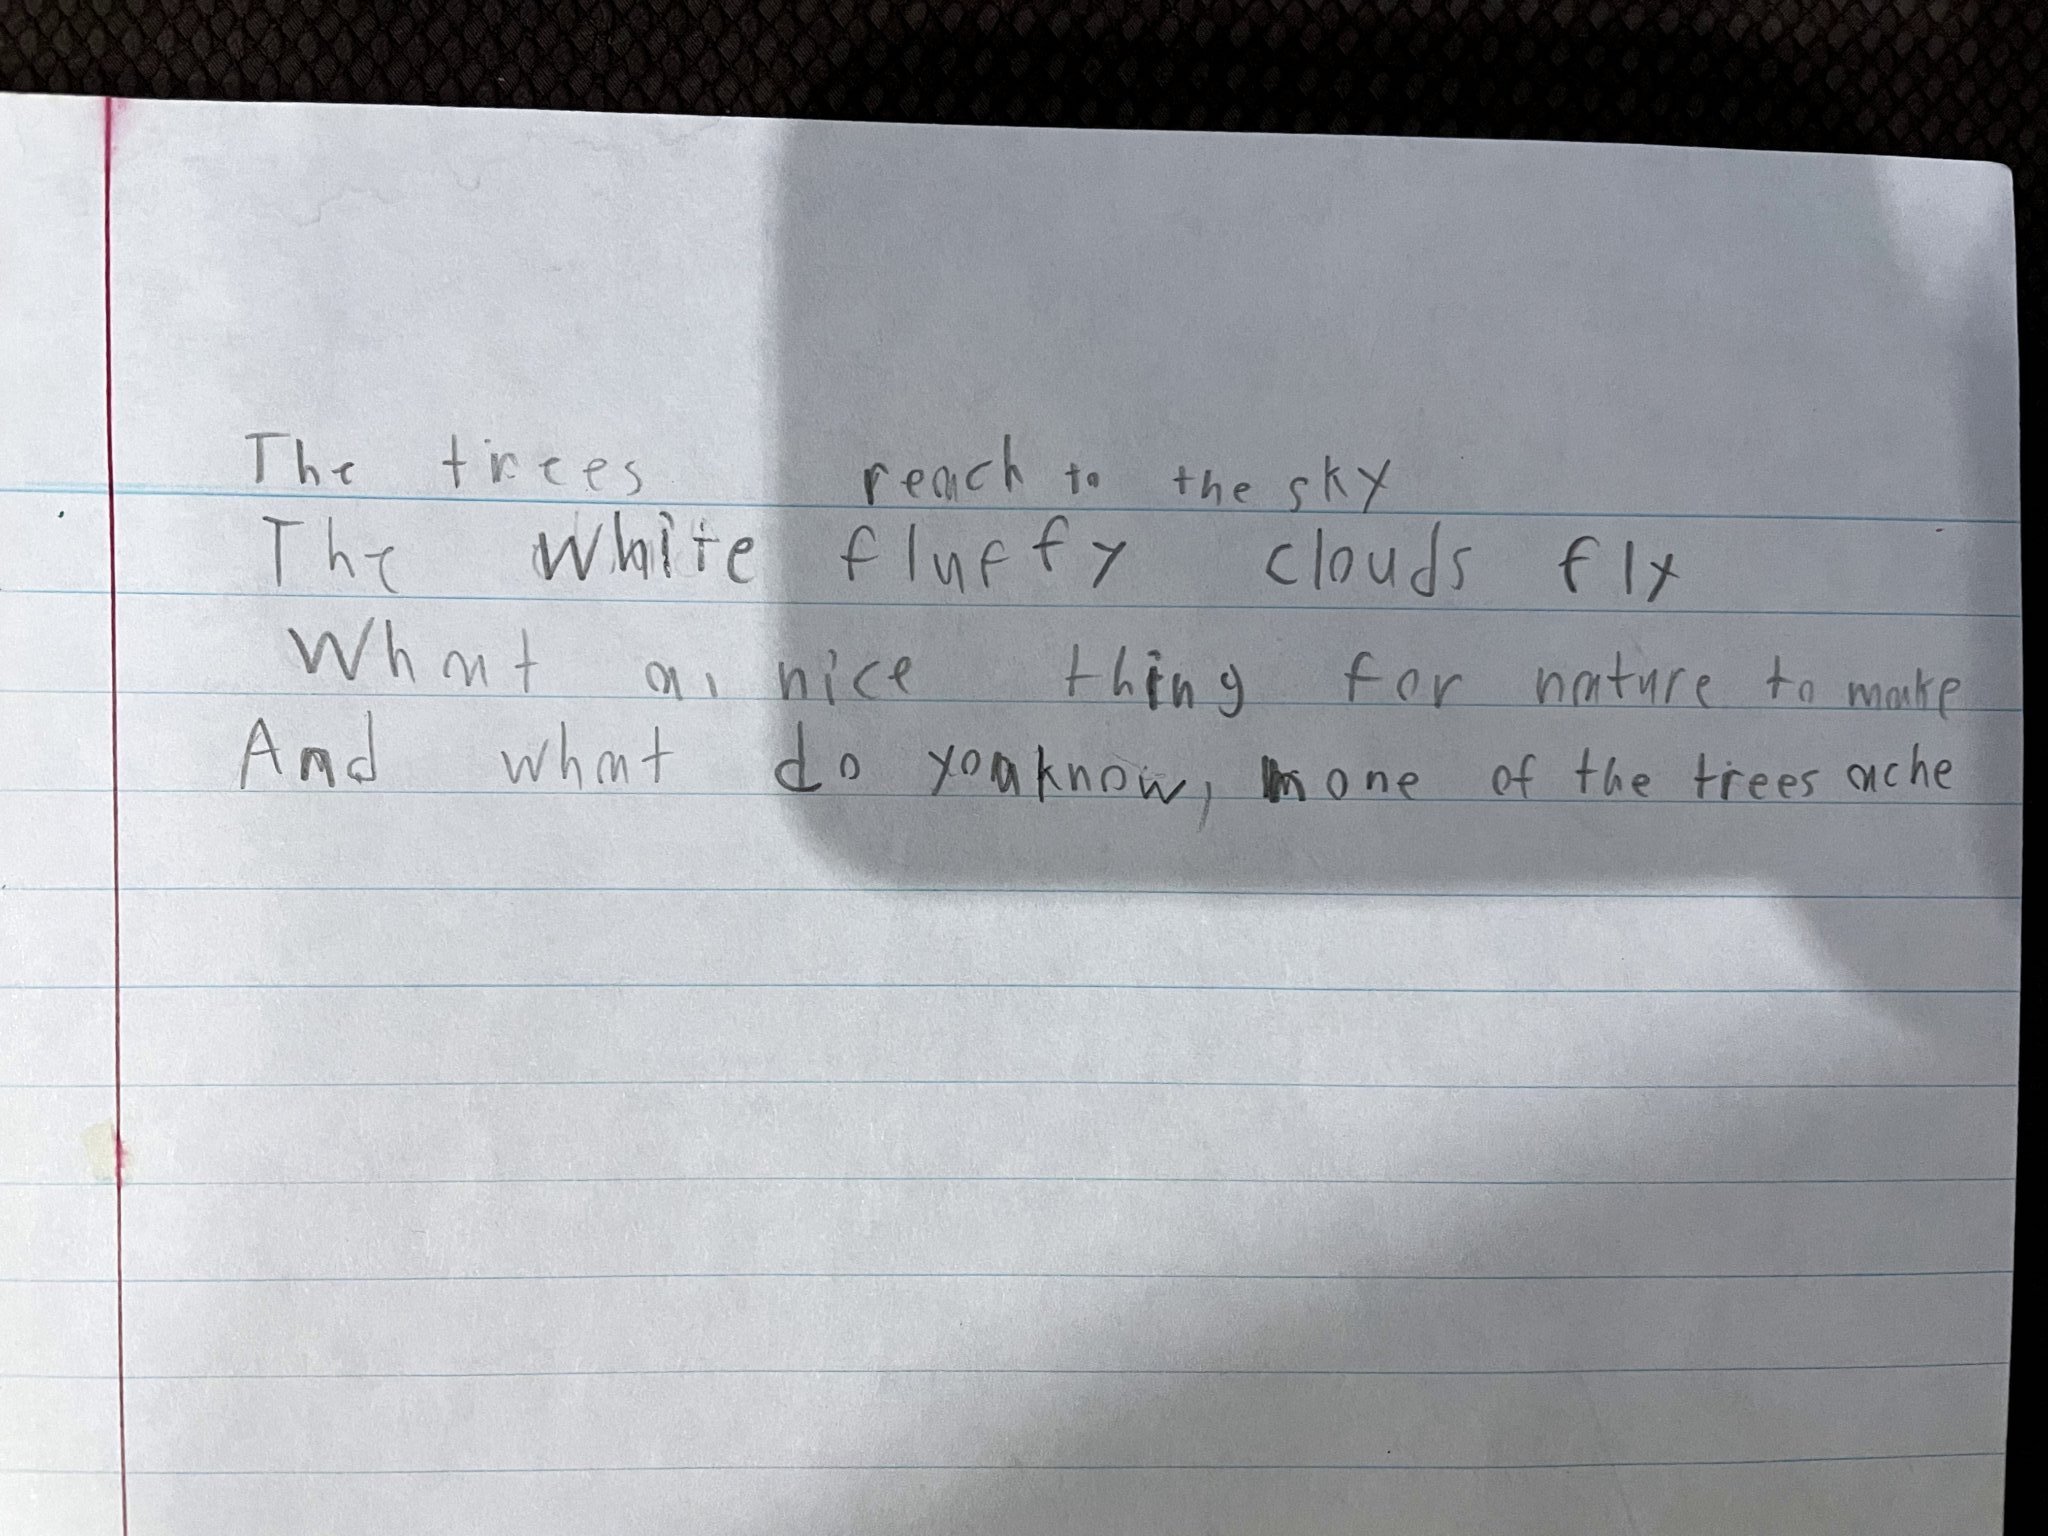 A young kid writes in a notebook about what they found in nature.